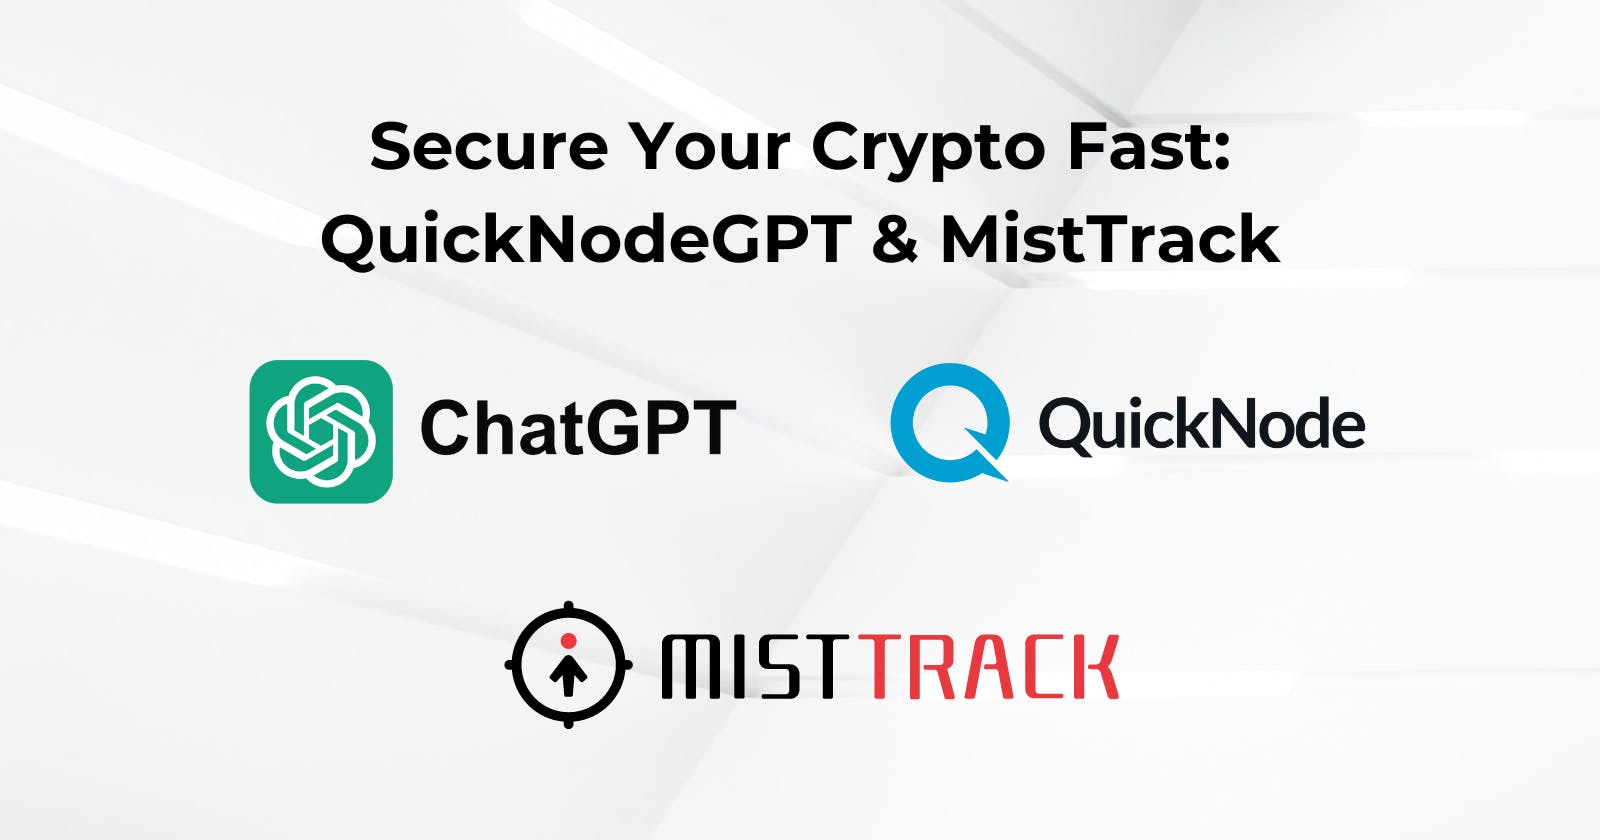 Secure your Crypto Fast:QuickNodeGPT & MisTrack